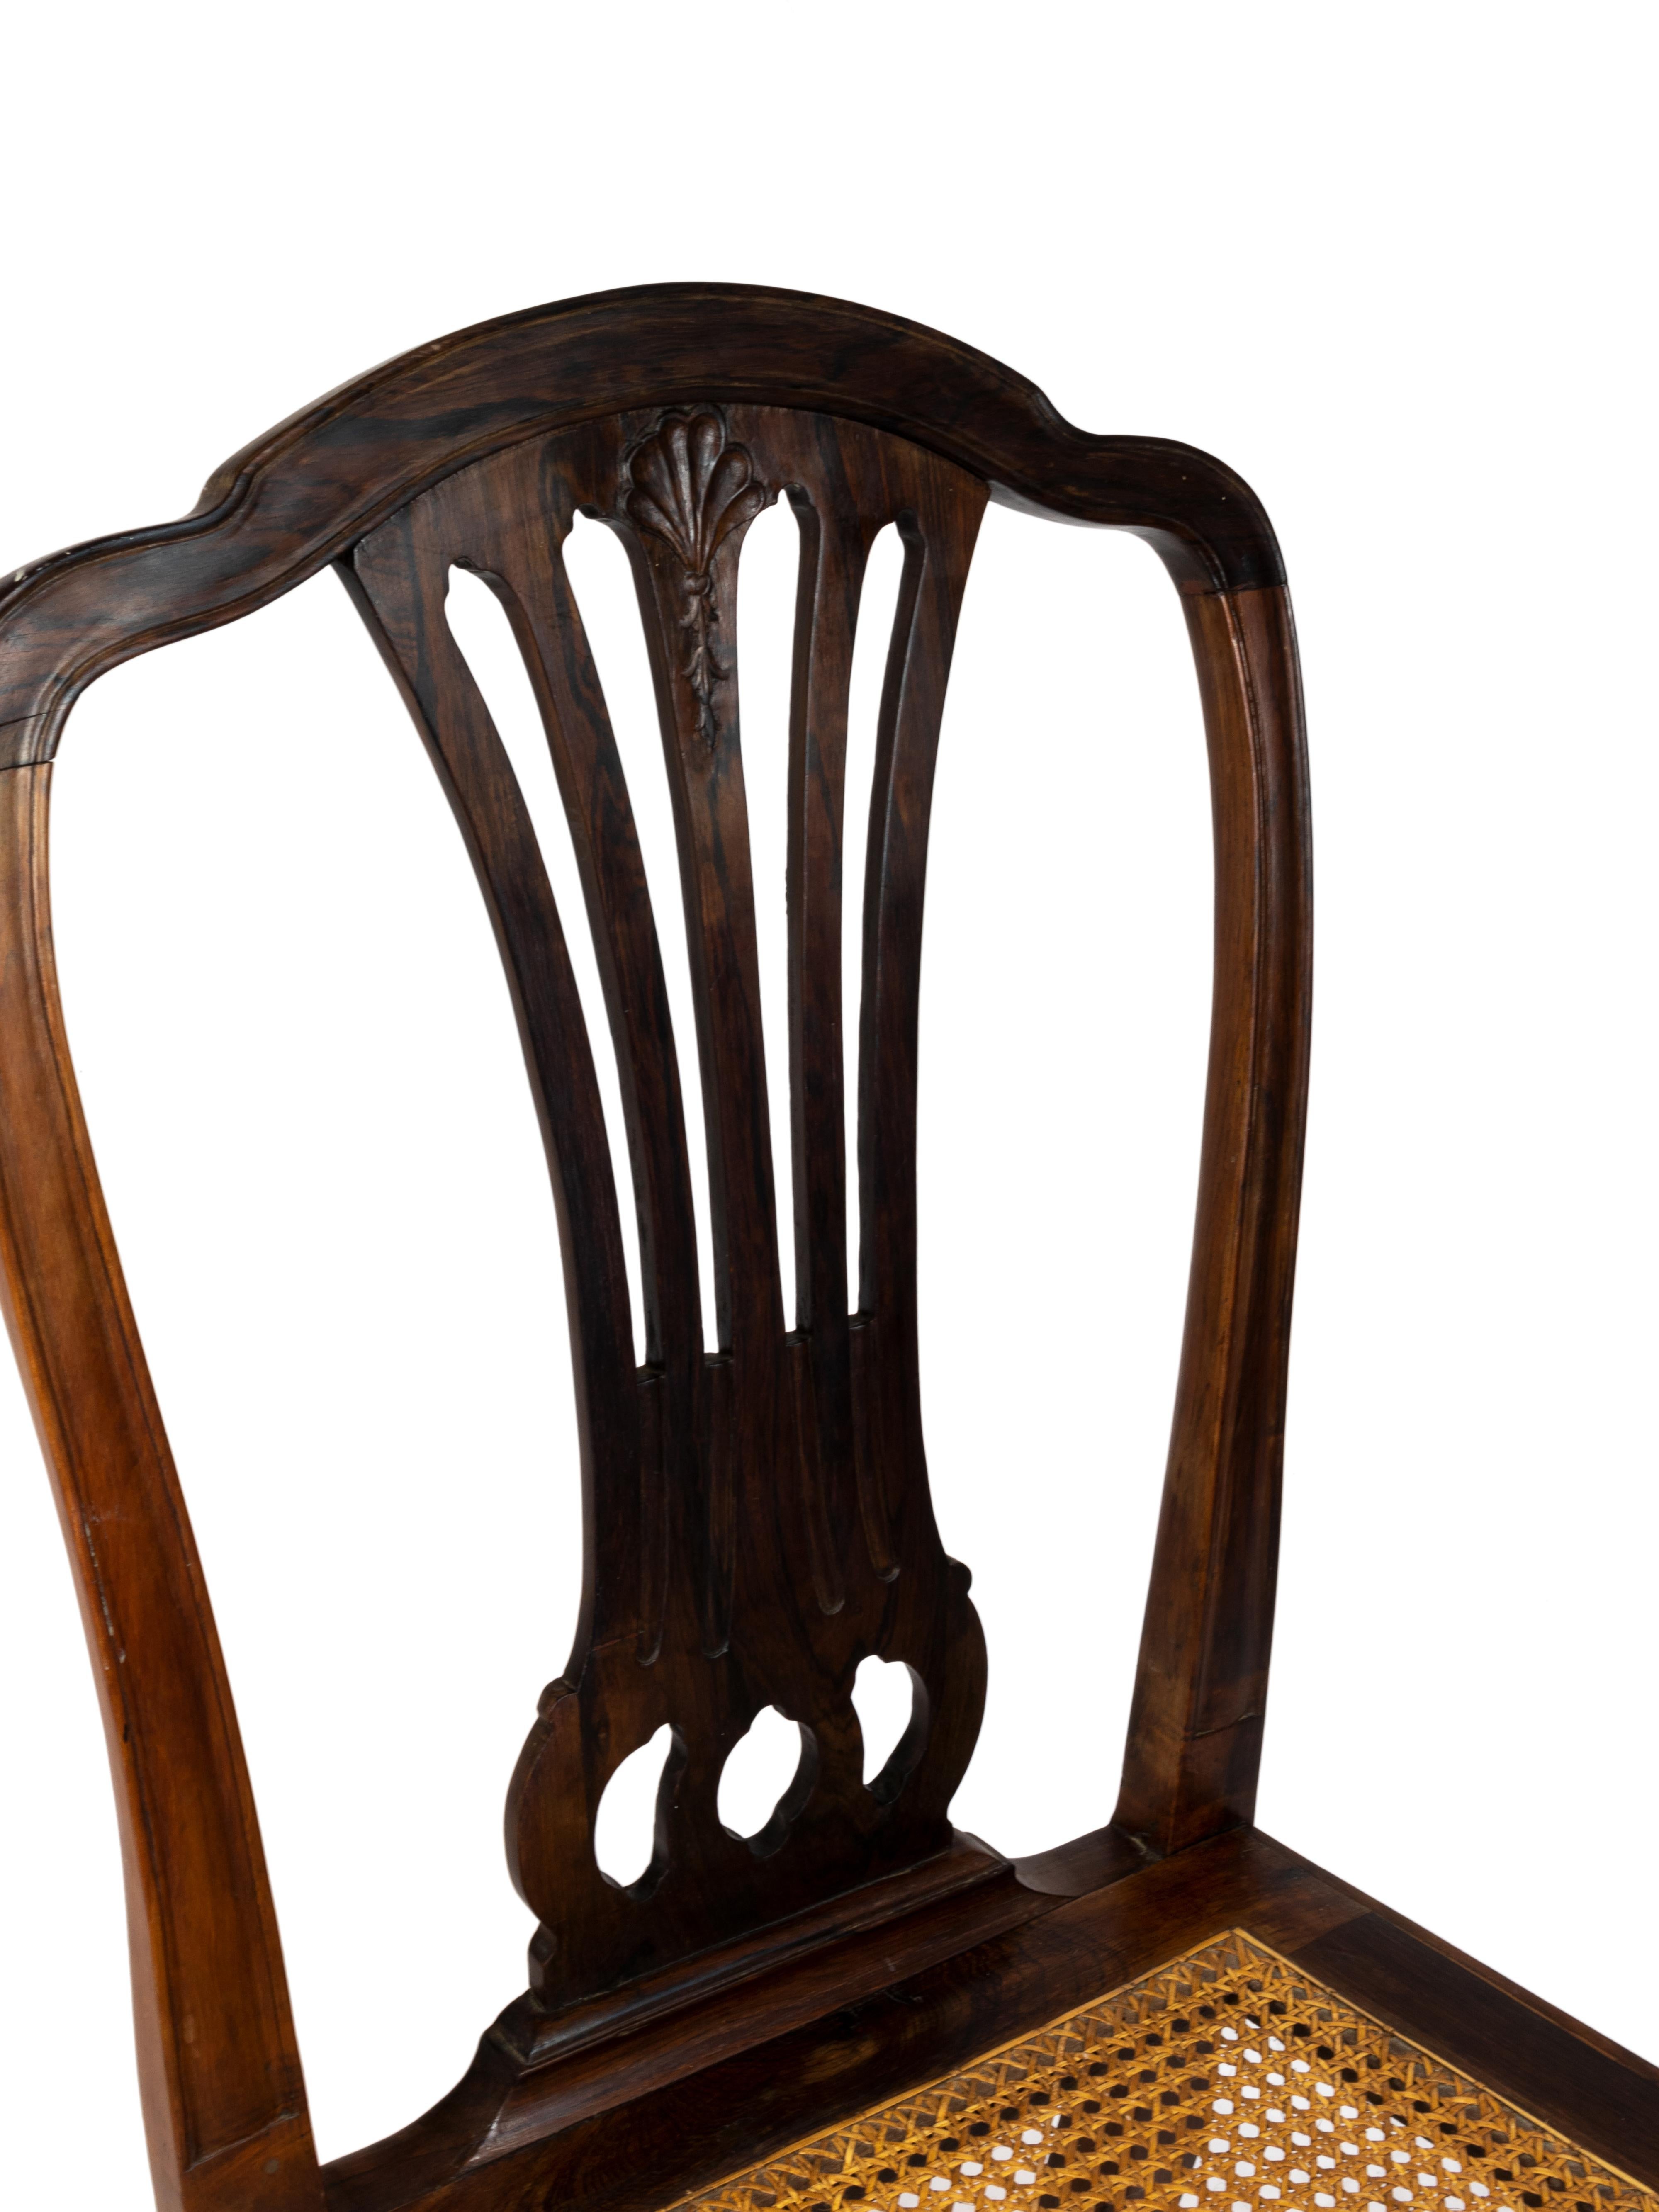 Chippendale Style Amphora Chair, 19th Century For Sale 3